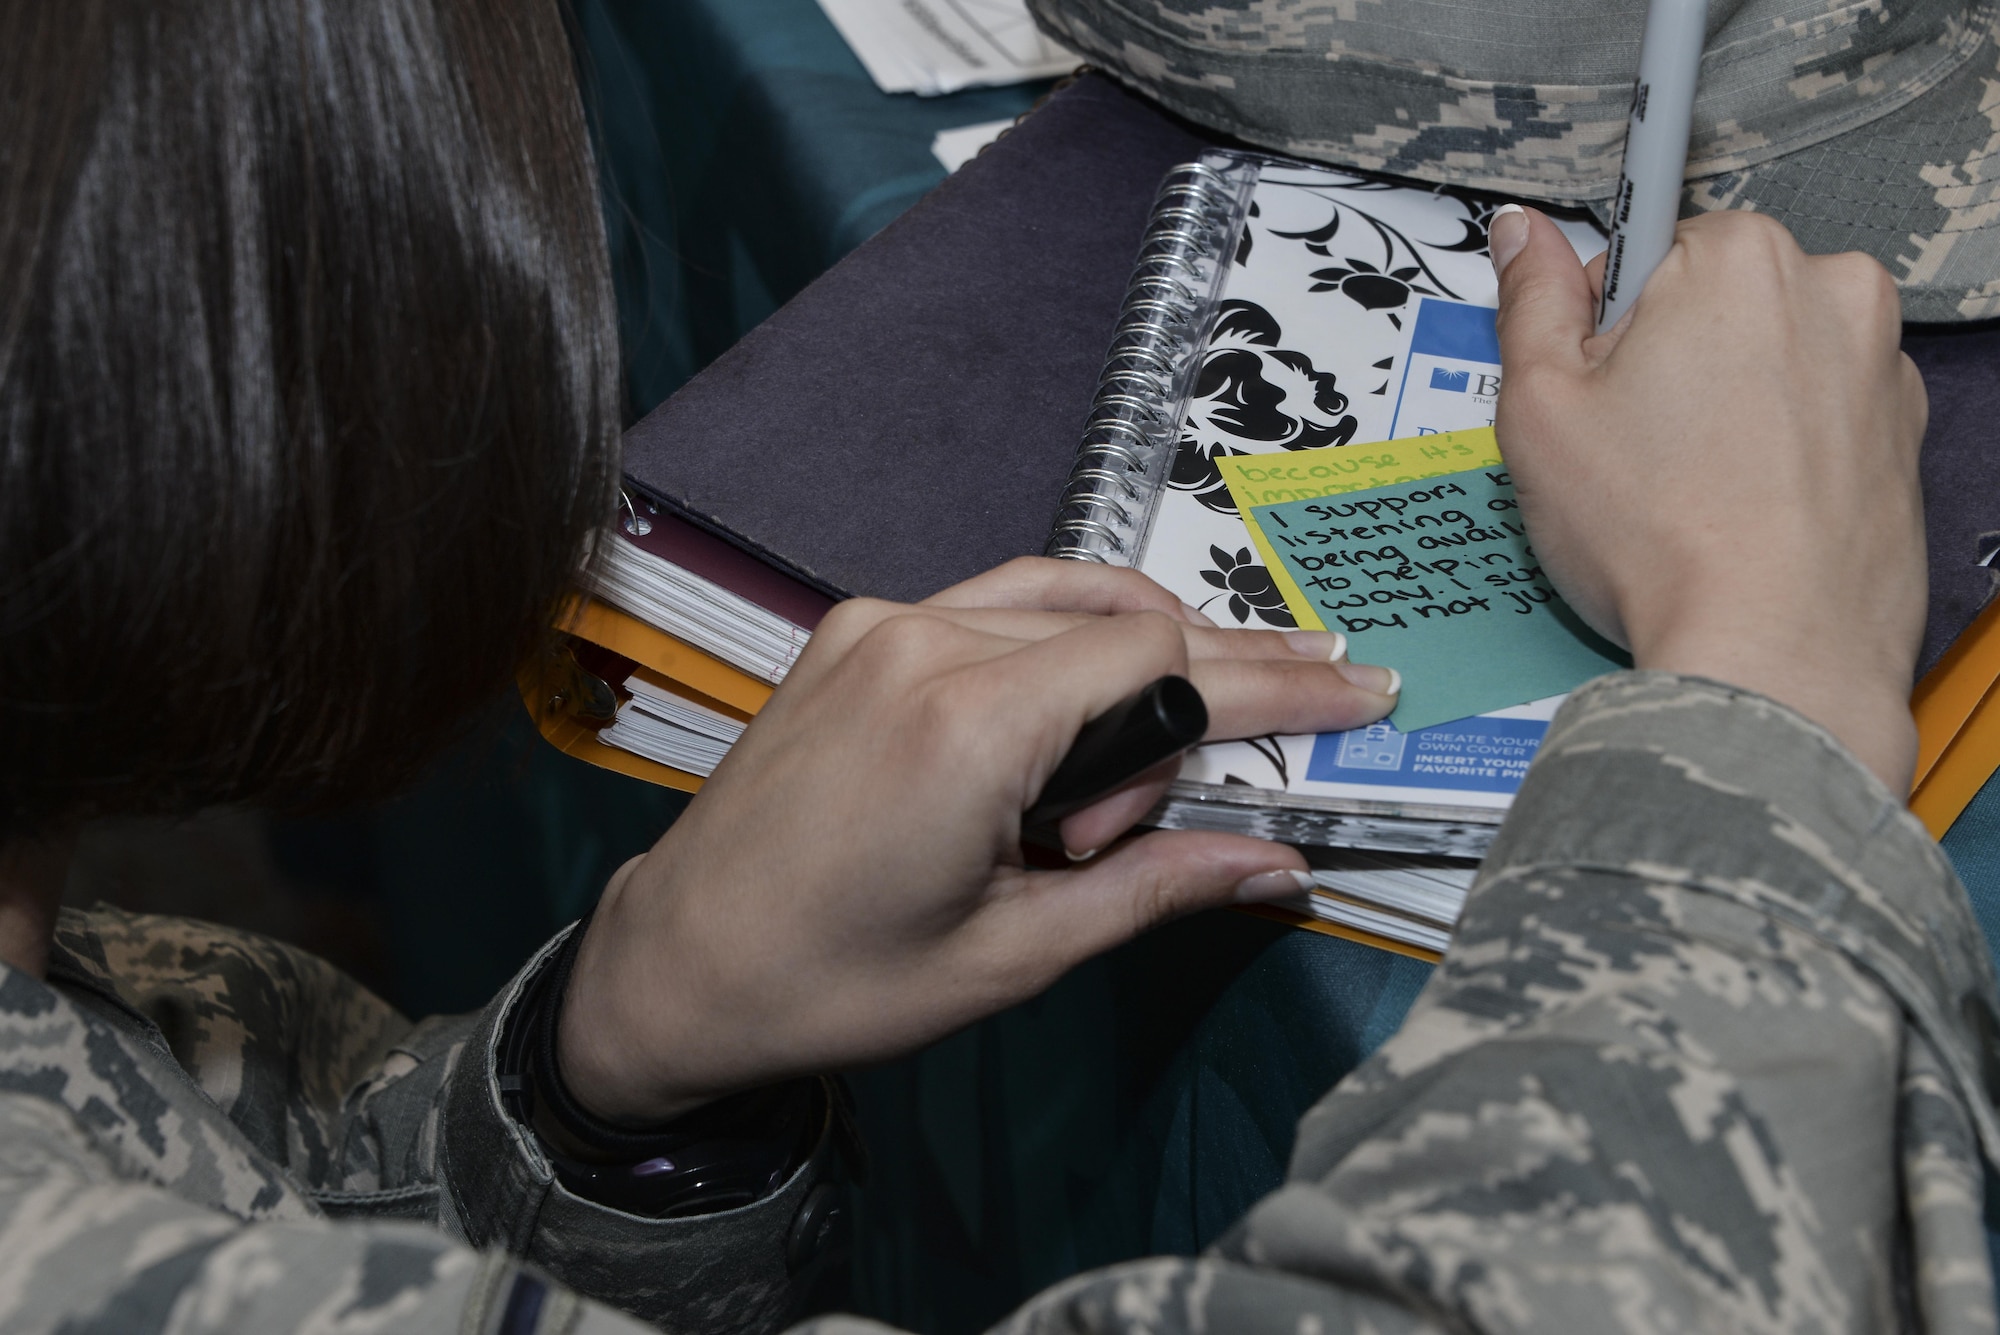 Airman Amanda, 32nd Intelligence Squadron, writes a message to sexual assault survivors on a sticky note as part the Stick with Survivors project April 13. Stick with Survivors is a project created by the 70th Intelligence, Surveillance and Reconnaissance Wing Sexual Assault and Response office that will assist military and civilian members in showing their support for sexual assault survivors. (U.S. Air Force photo by Staff Sgt. Alexandre Montes)